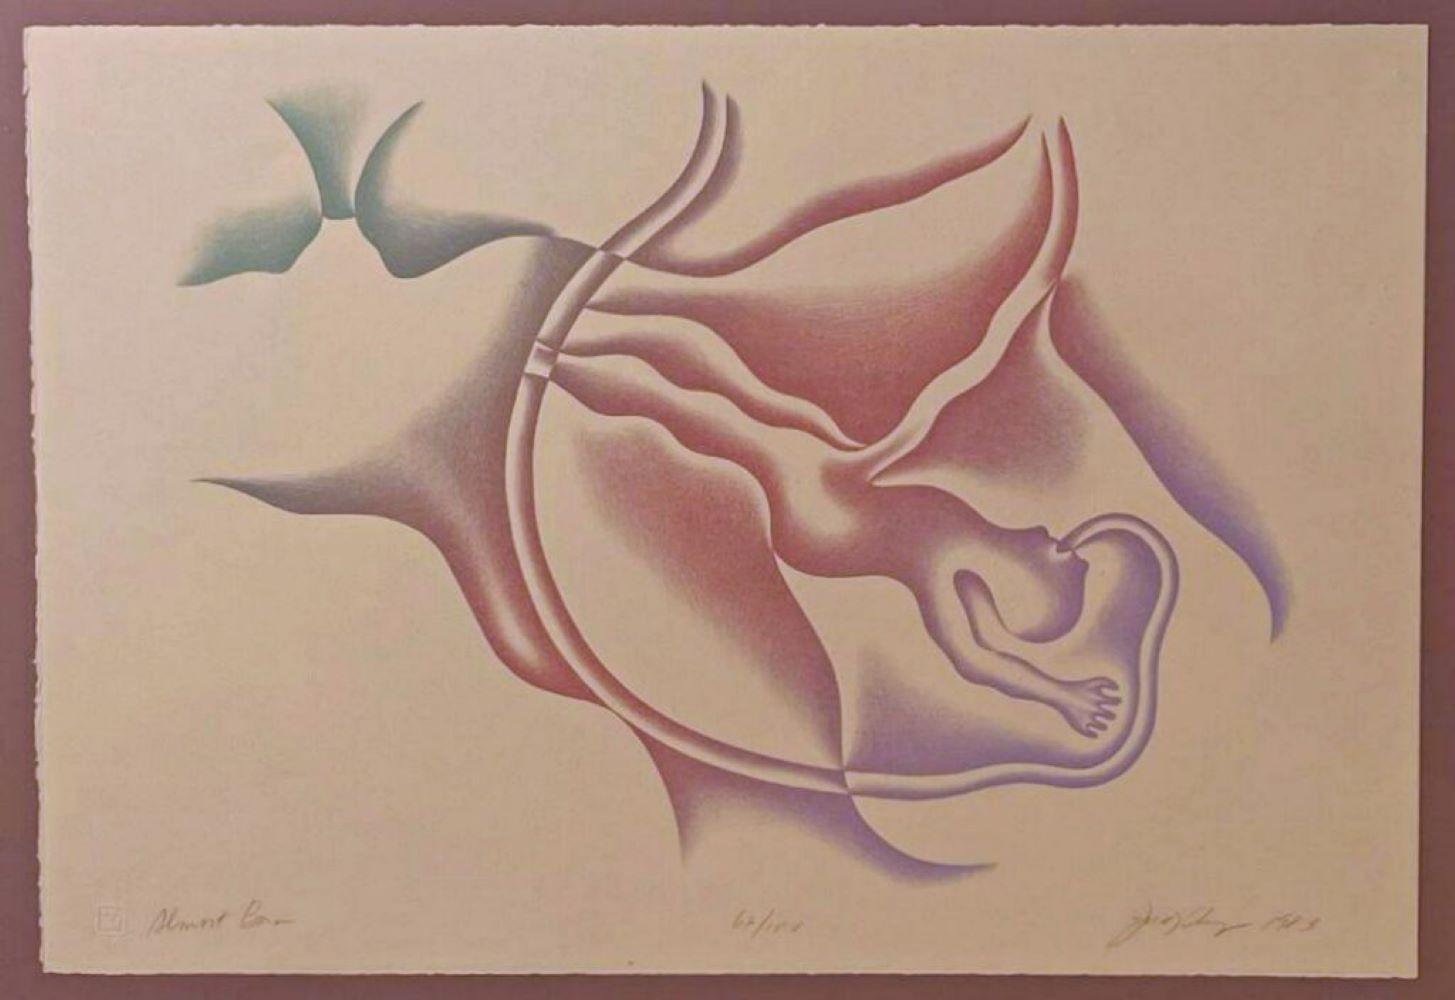 Judy Chicago Abstract Print - Almost Born (early signed/n lithograph by world renowned feminist artist) 